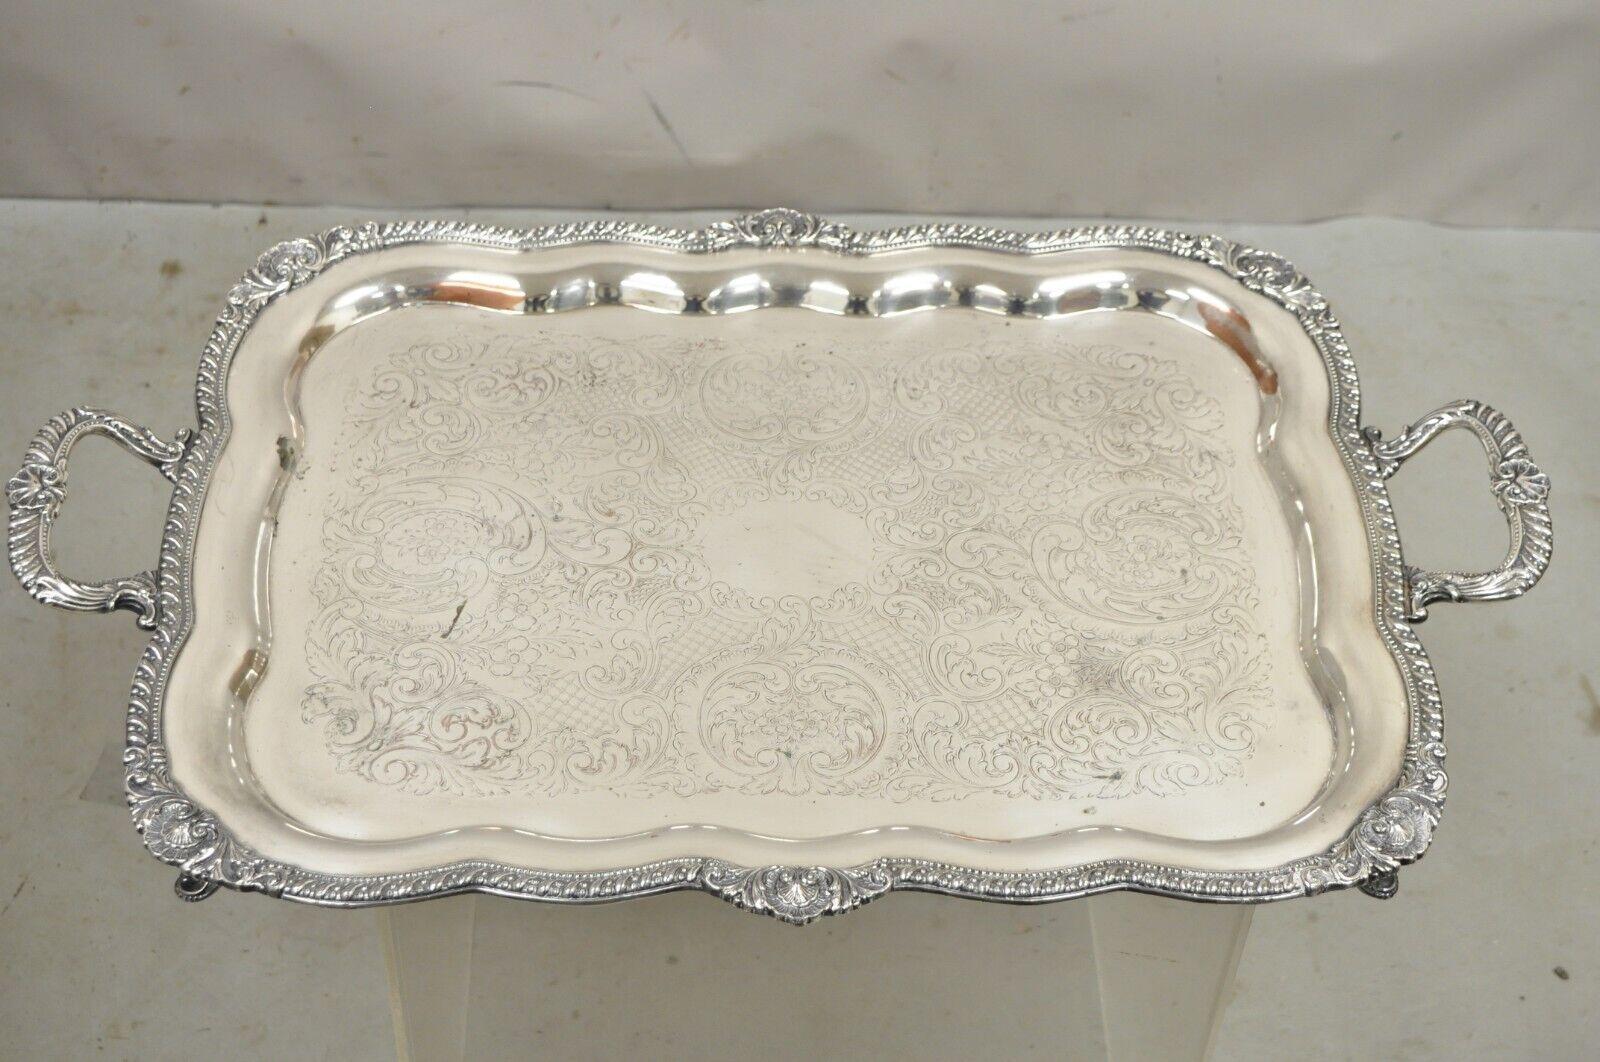 Antique English Victorian Large Silver Plated Scalloped Serving Platter Tray. Item featured is a large impressive size, raised on ornate feet, original hallmark, quality English craftsmanship. Circa Early to mid 20th Century. Measurements:  2